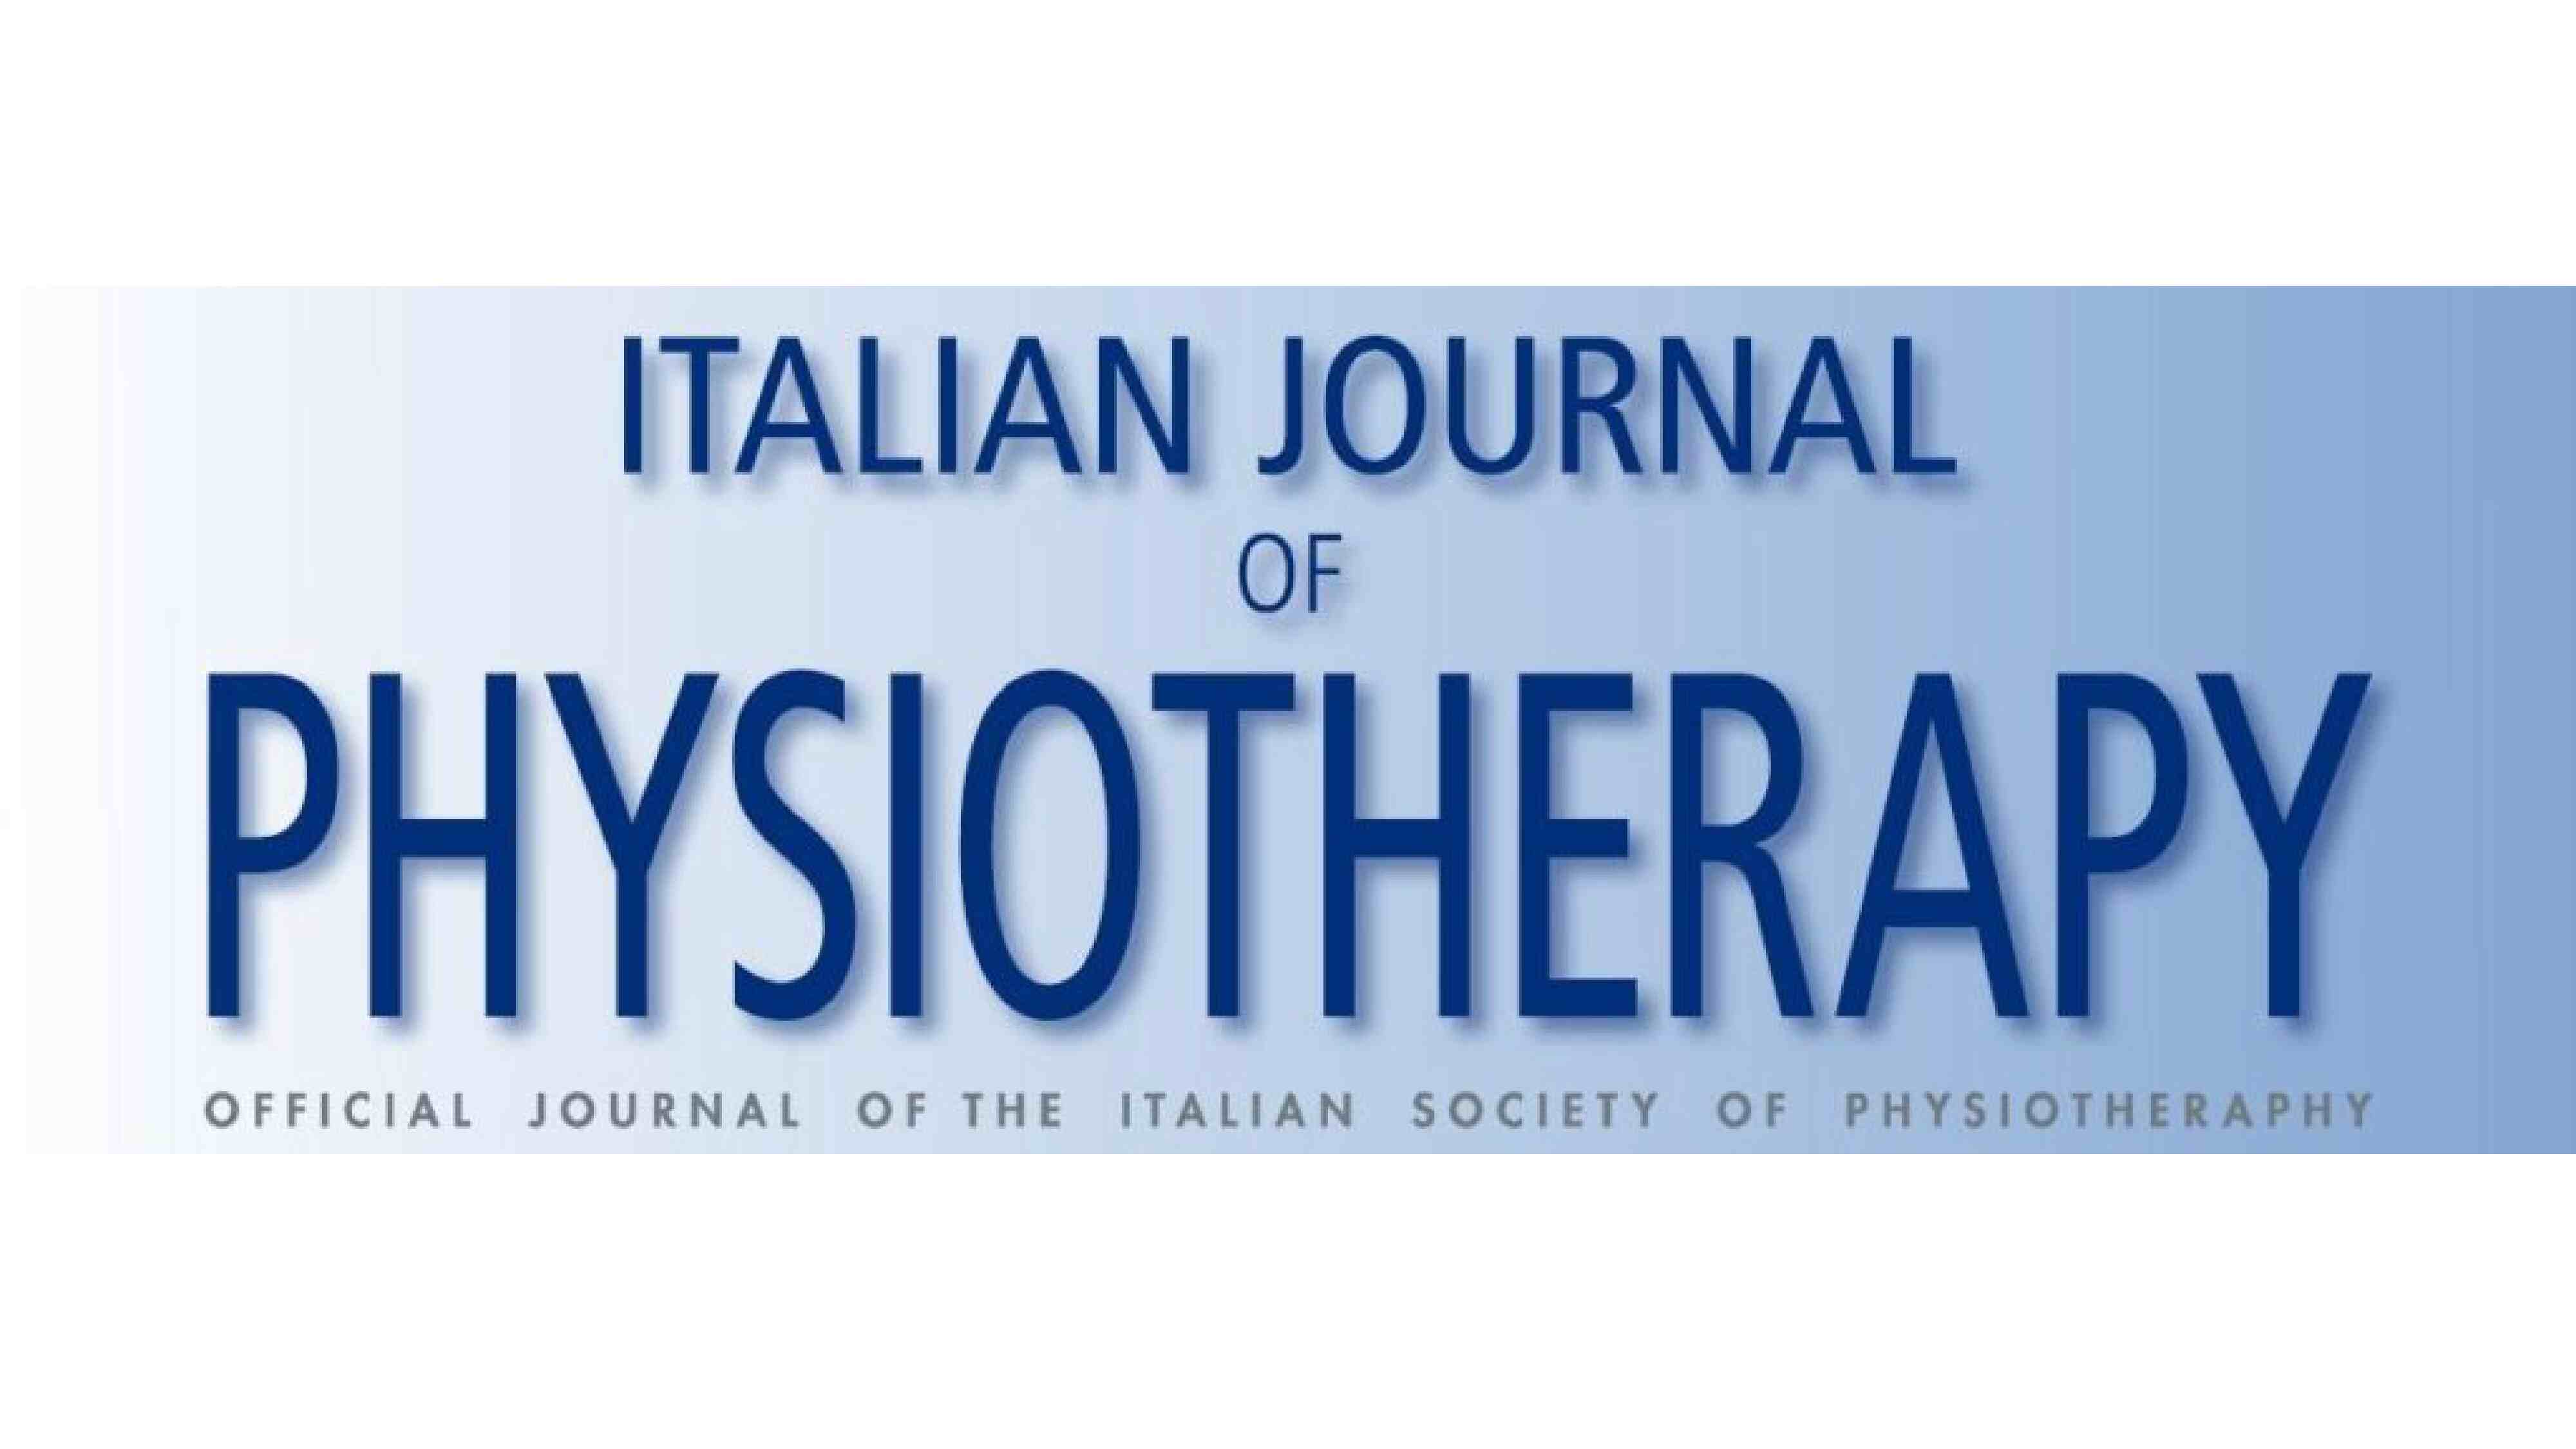 ITALIAN JOURNAL OF PHYSIOTERAPY